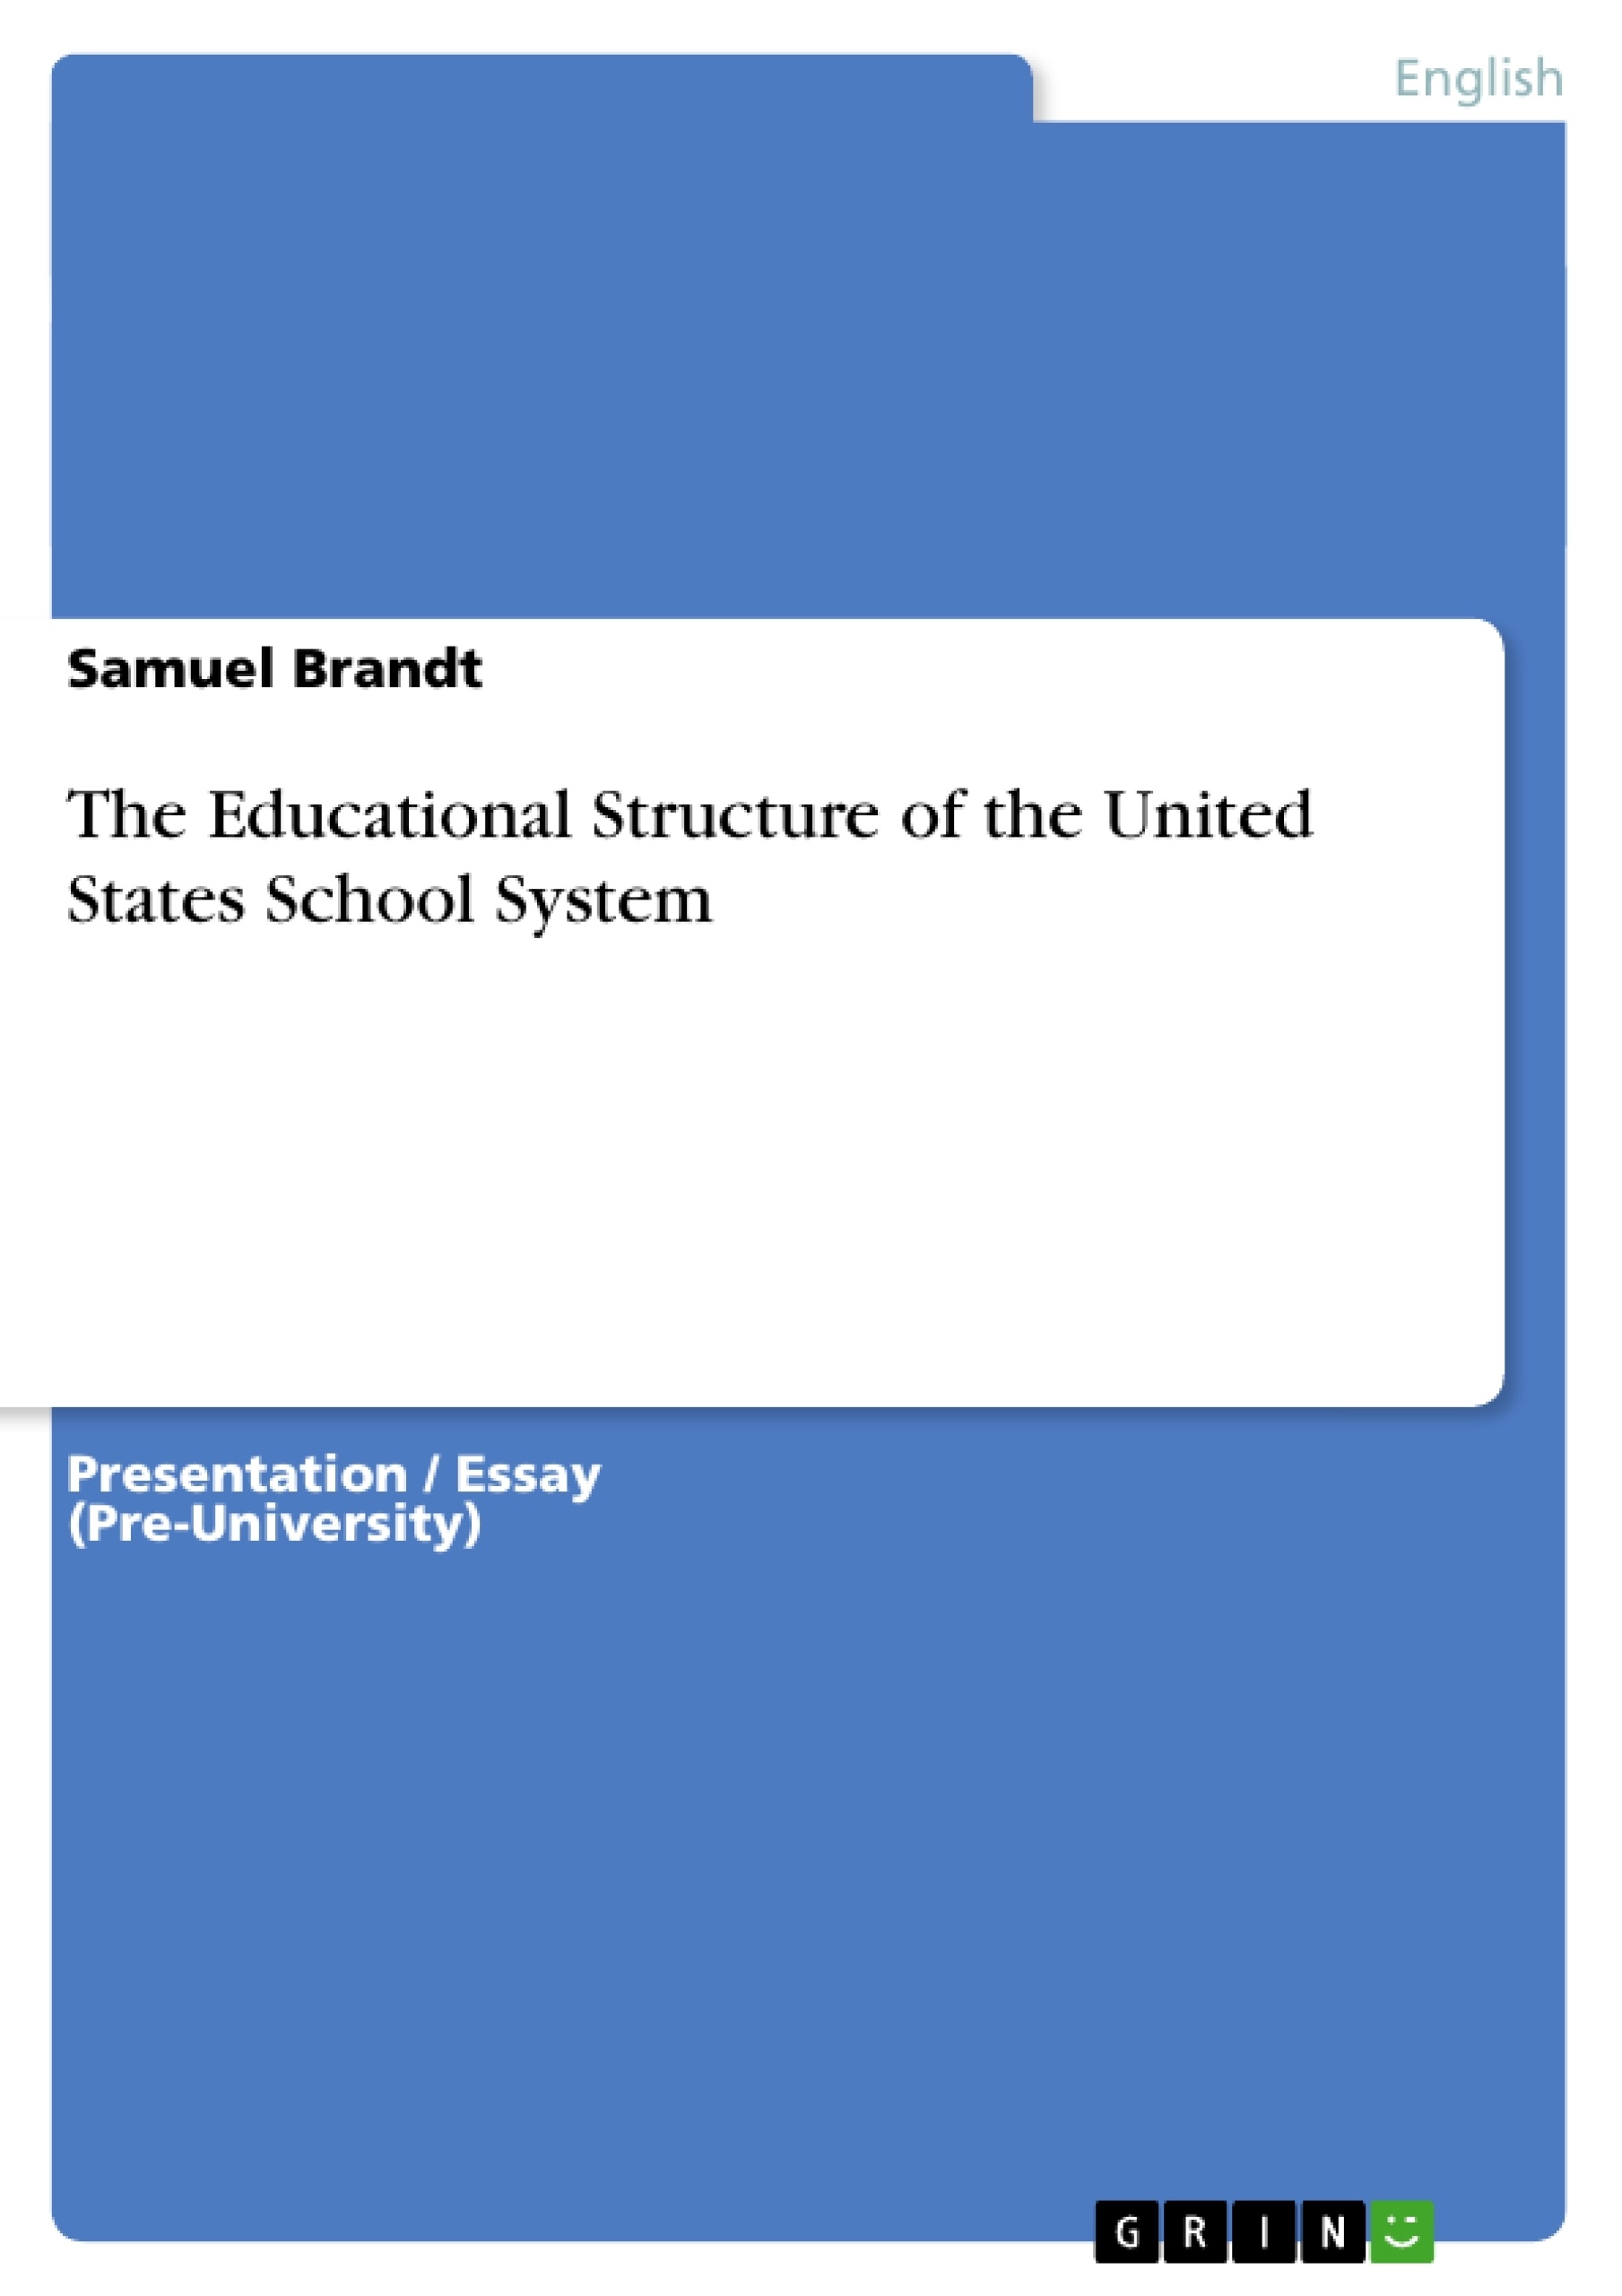 Título: The Educational Structure of the United States School System